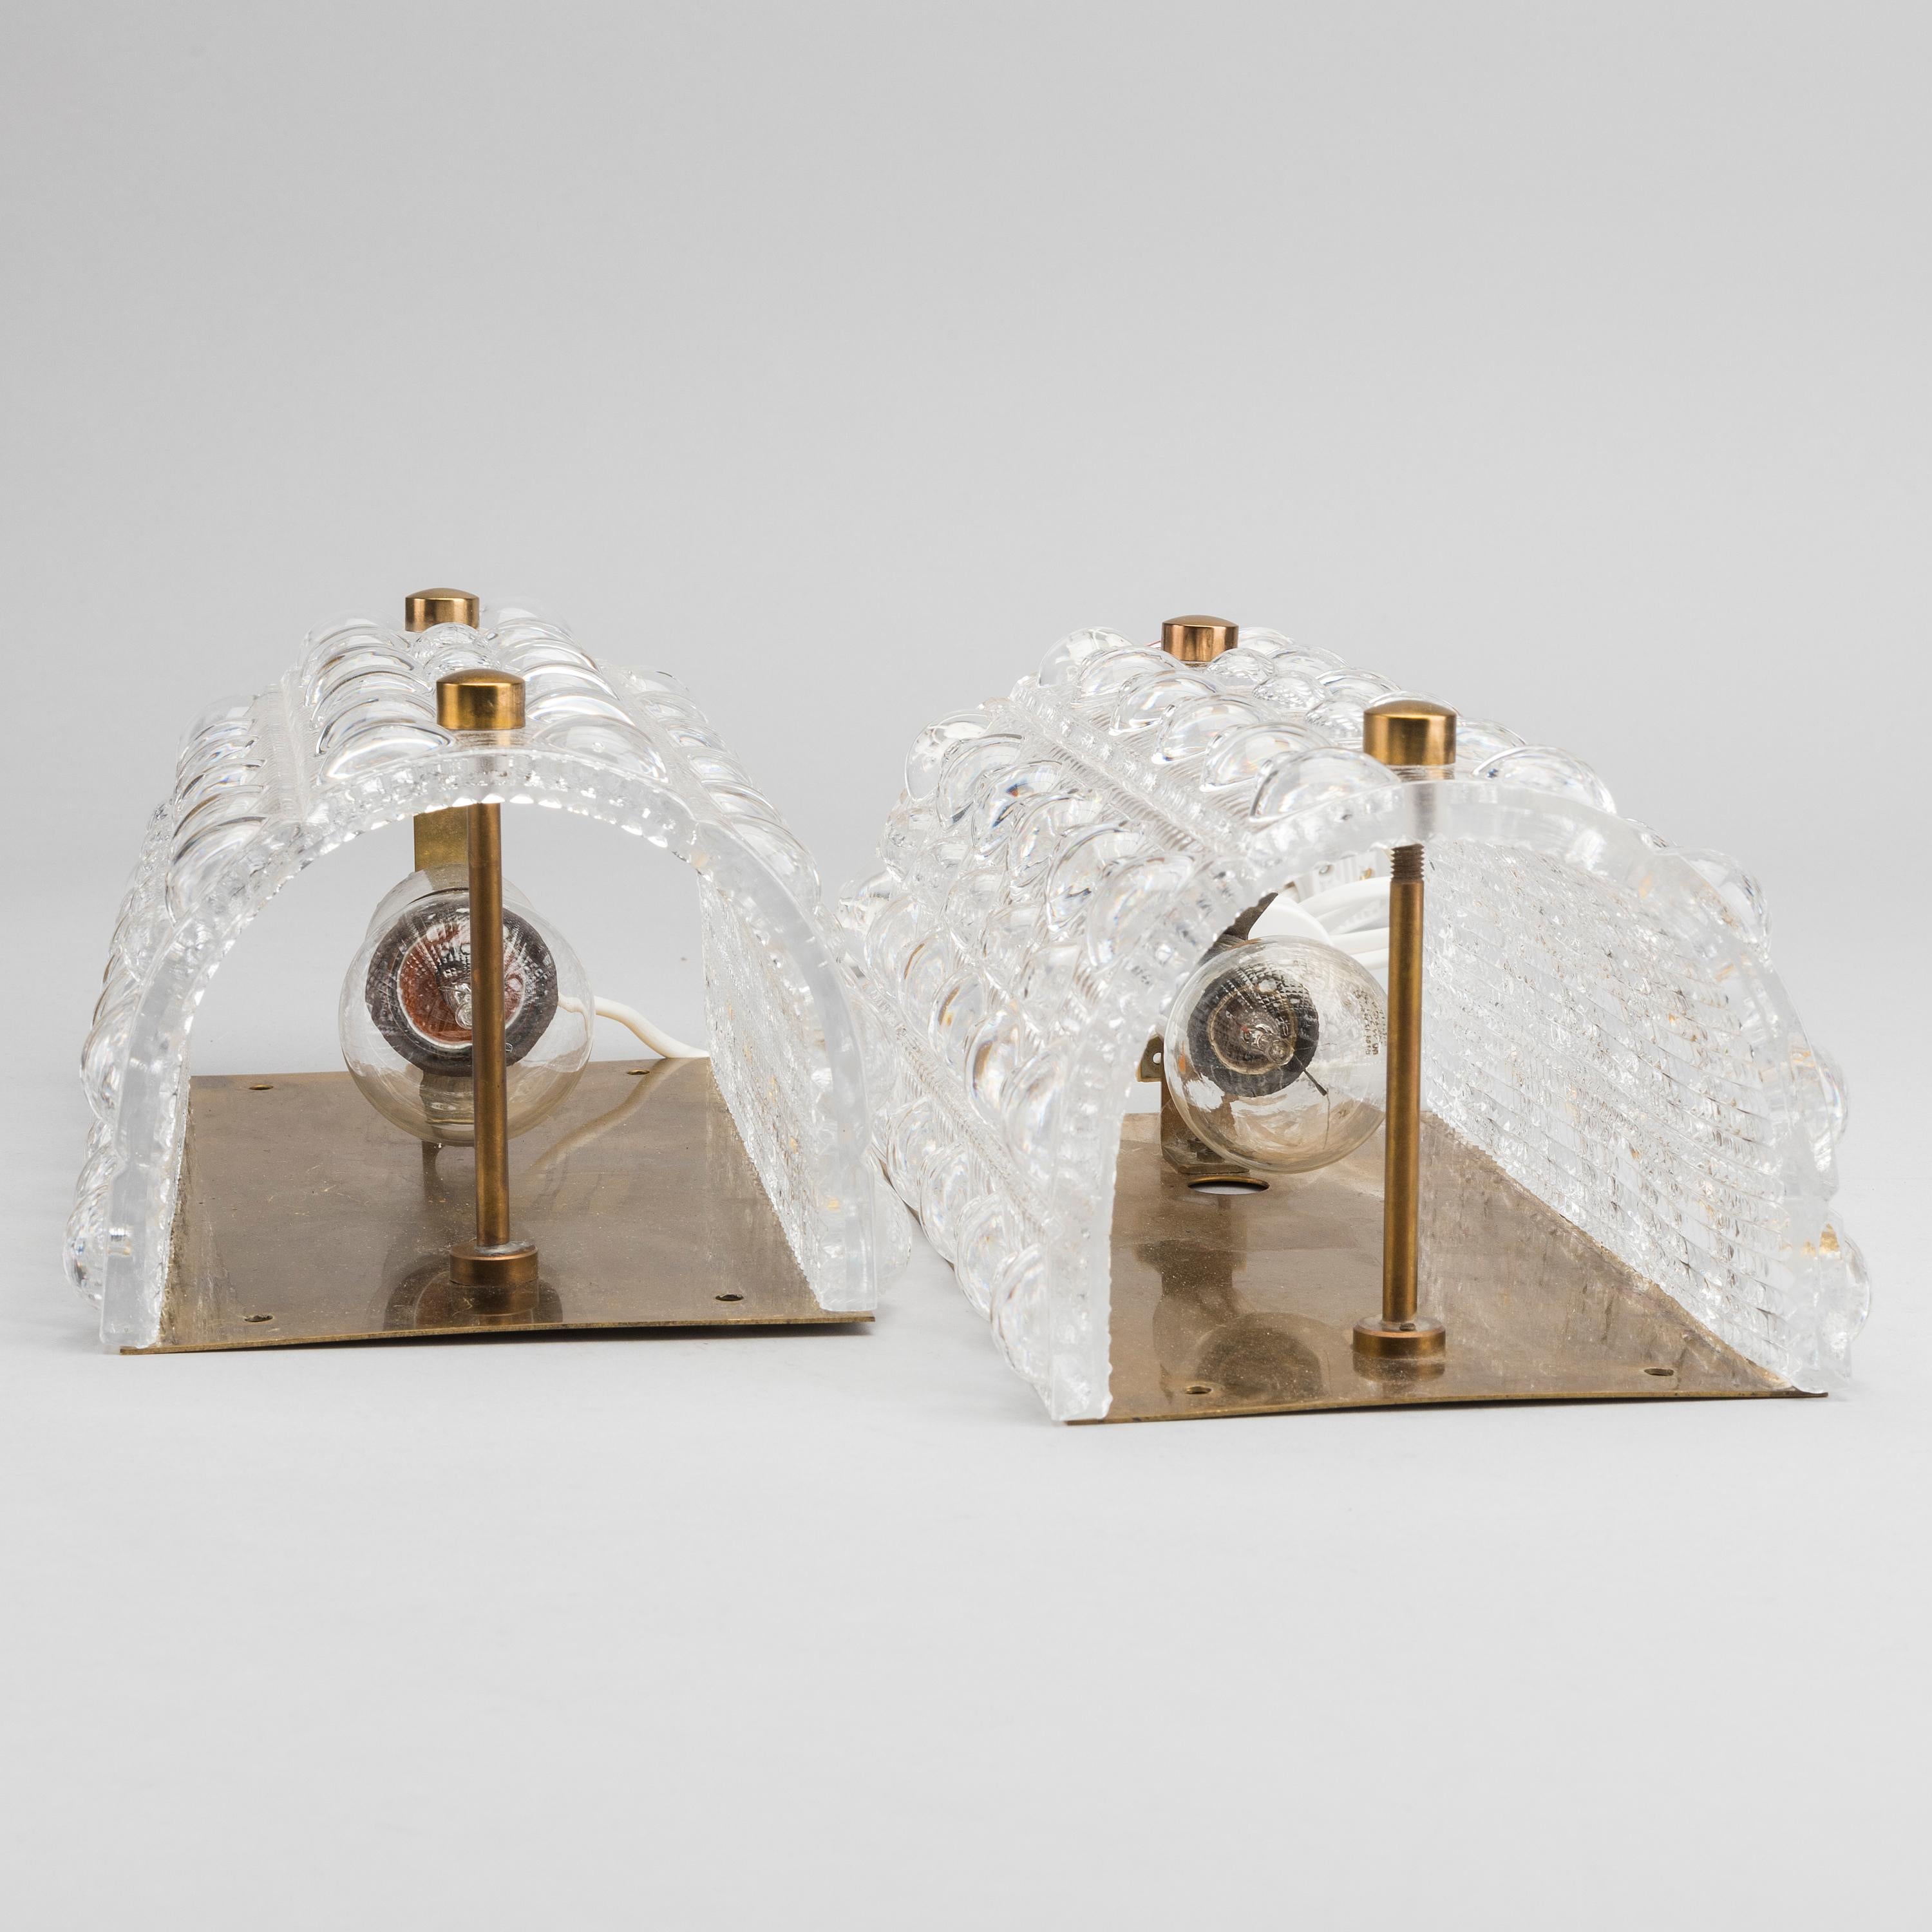 Carl Fagerlund Pair of Large Brass and Glass Wall Sconces for Swedish Orrefors (20. Jahrhundert)